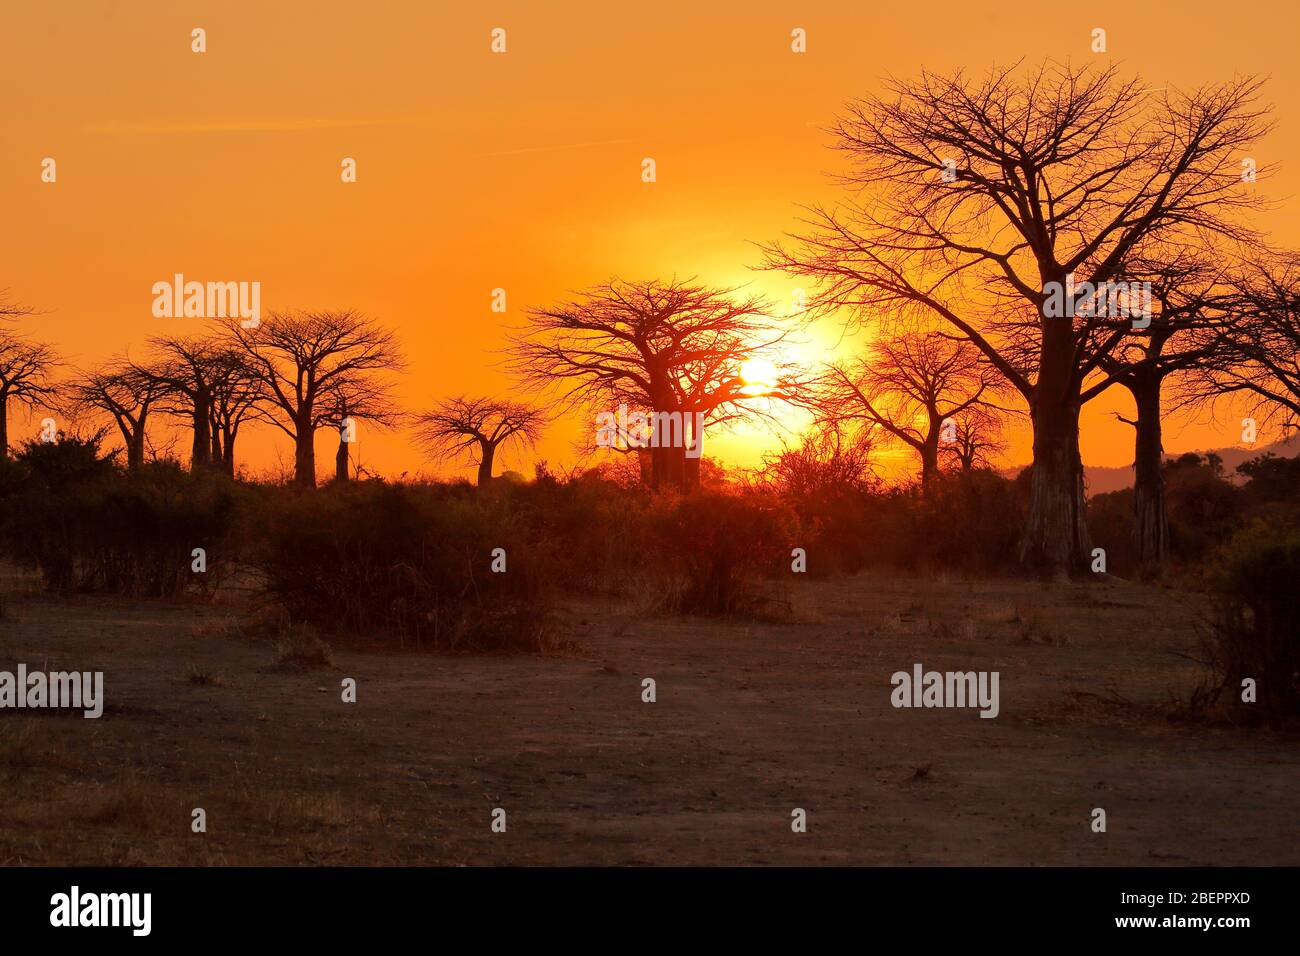 Silhouettes of Baobab and Acacia trees at an African sunrise Stock Photo